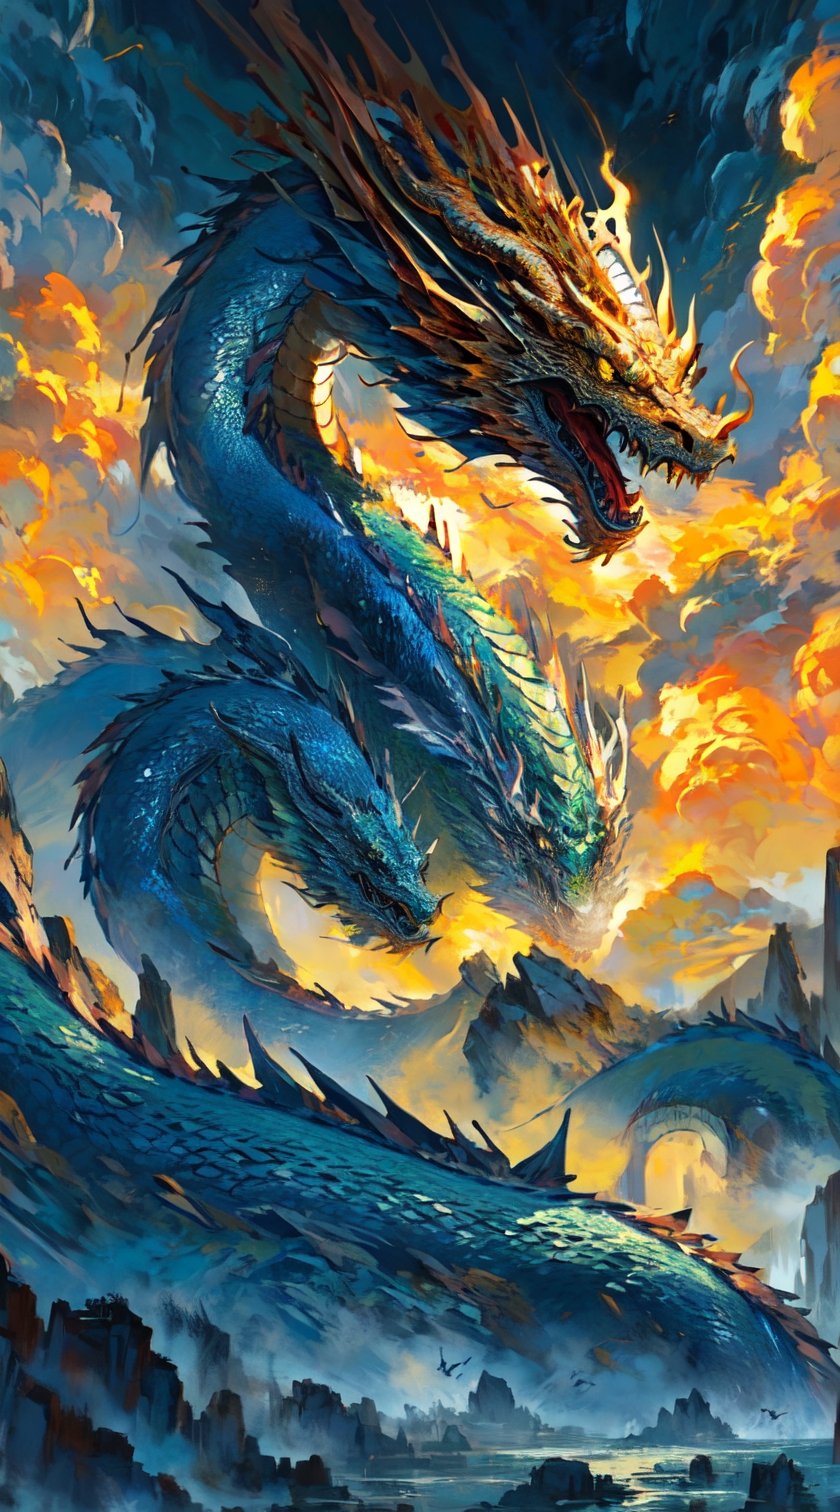 GODZILKA MONSTER a dragon with a golden halo in the background, by Yang J, legendary dragon, dragon art, loong, black dragon, chinese dragon concept art, god of dragons, colossal dragon as background, epic dragon, dragon centered, dragon portrait, portrait of a dragon, cyborg dragon portrait, dragon mawshot art, a majestic gothic dragon, oil painting of dragon,long,M4rbleSCNEW, , , 